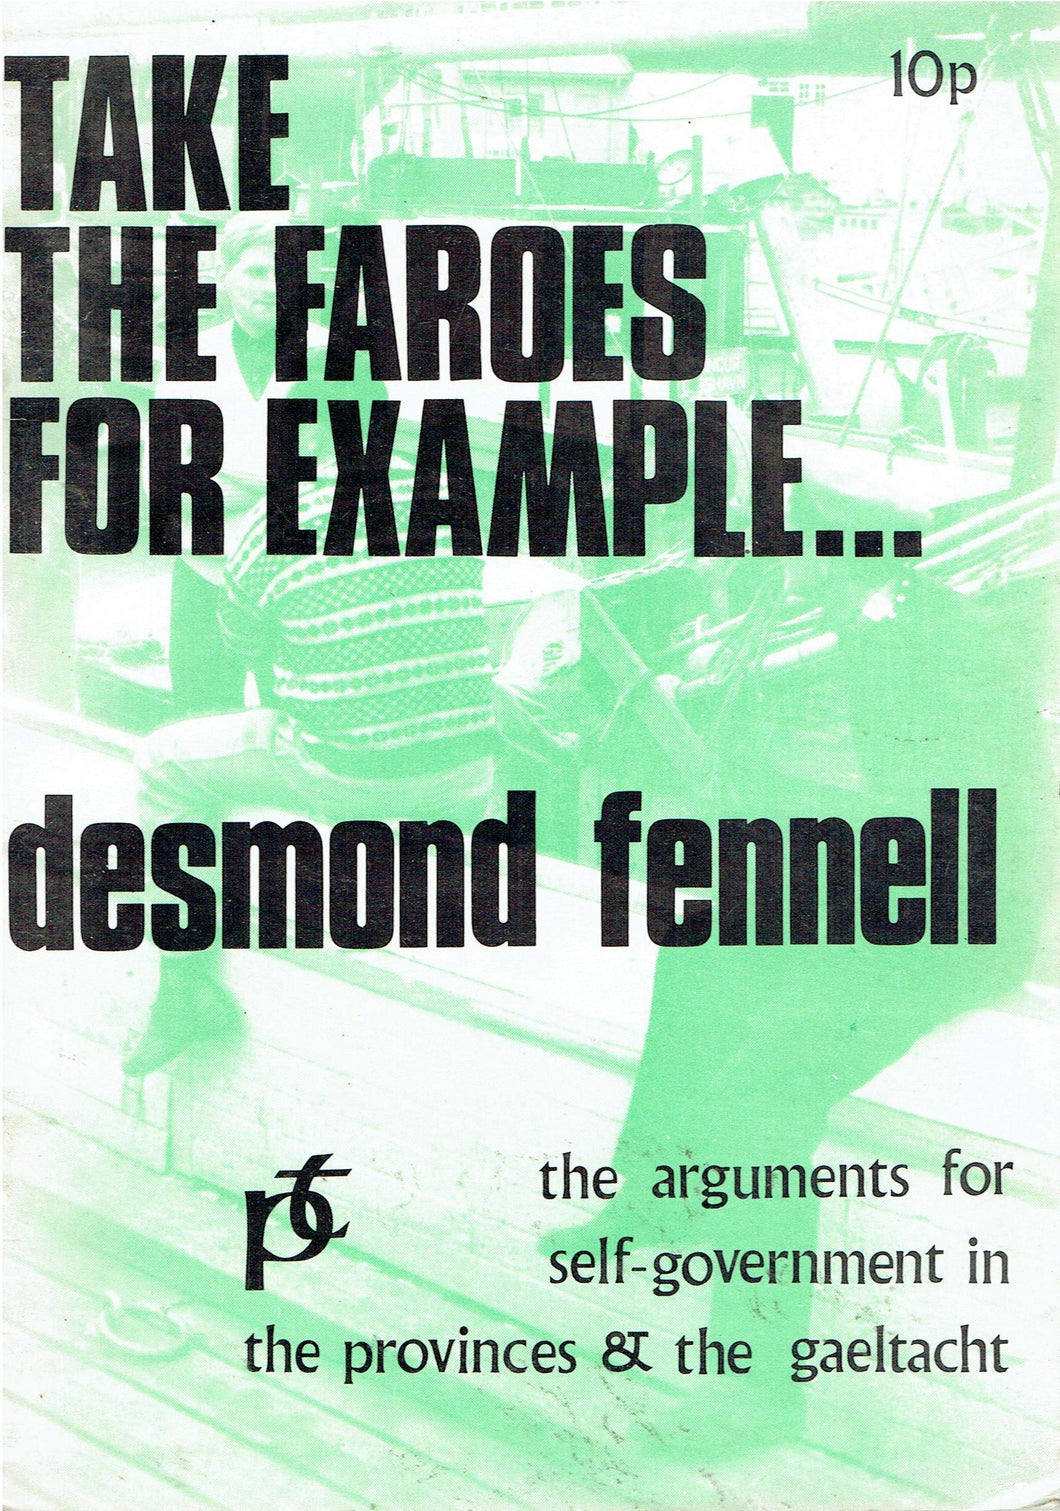 Take the Faroes for example: The arguments for self-government in the provinces and the Gaeltacht